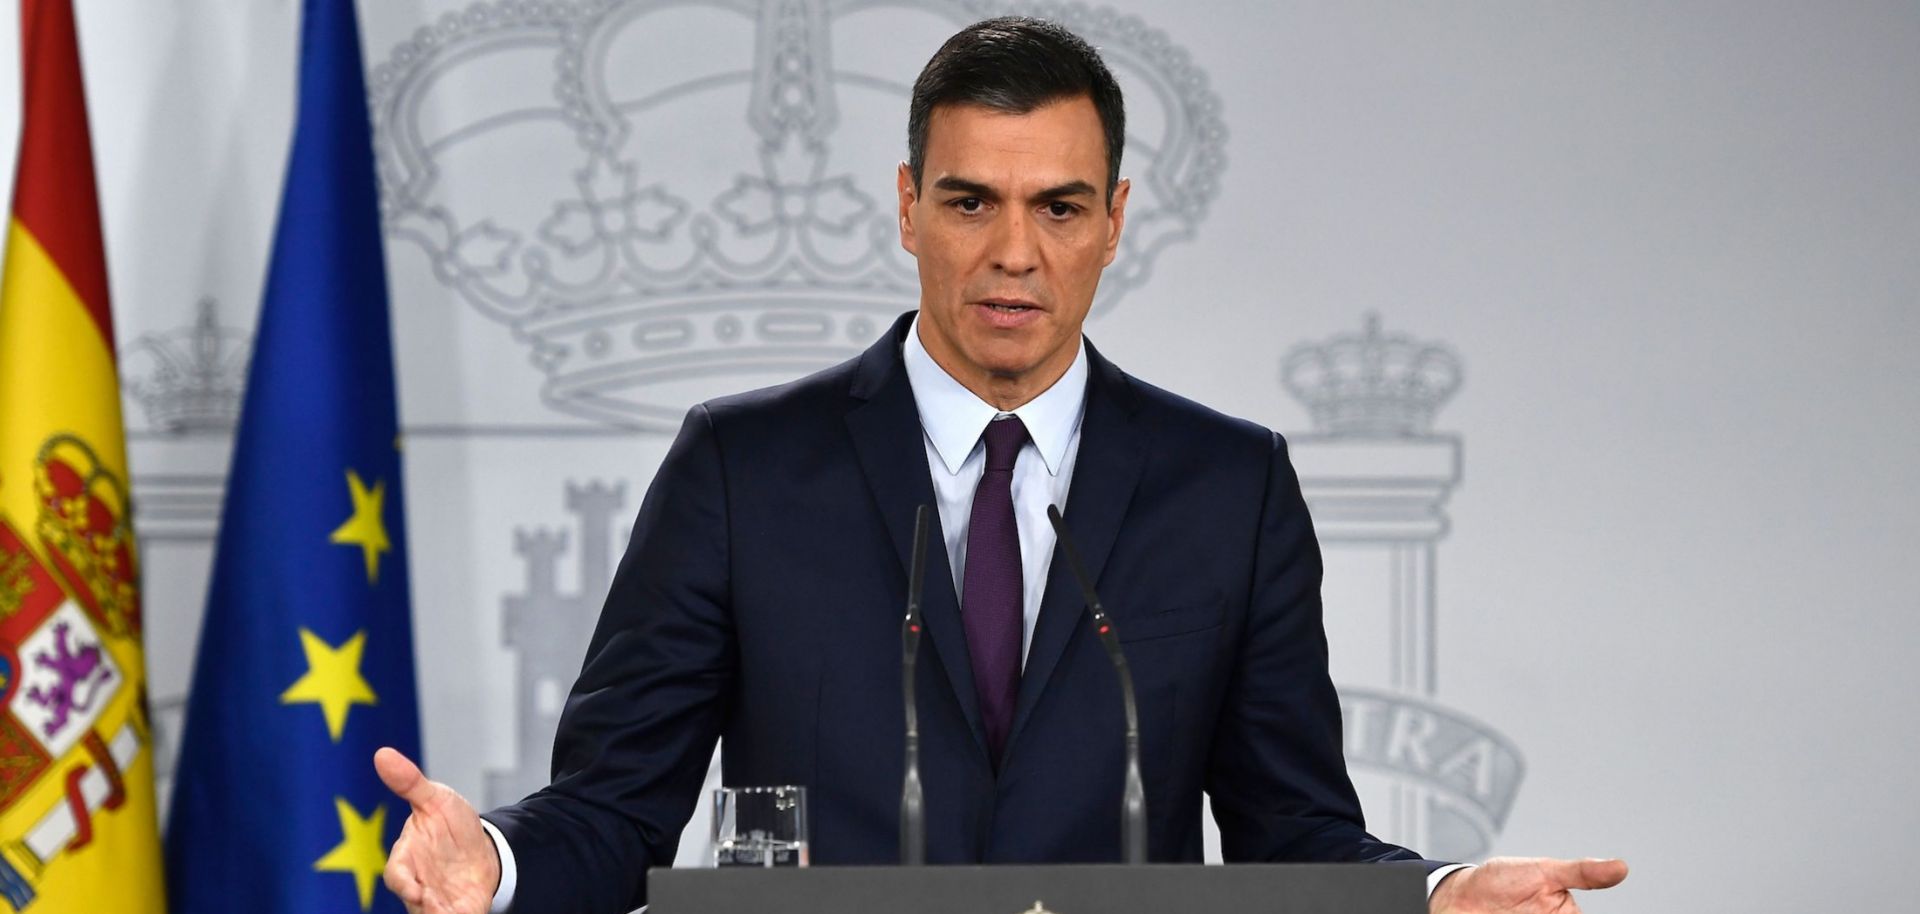 Spanish Prime Minister Pedro Sanchez discusses his government's decision to call early elections in April after a Cabinet meeting in Madrid on Feb. 15, 2019.